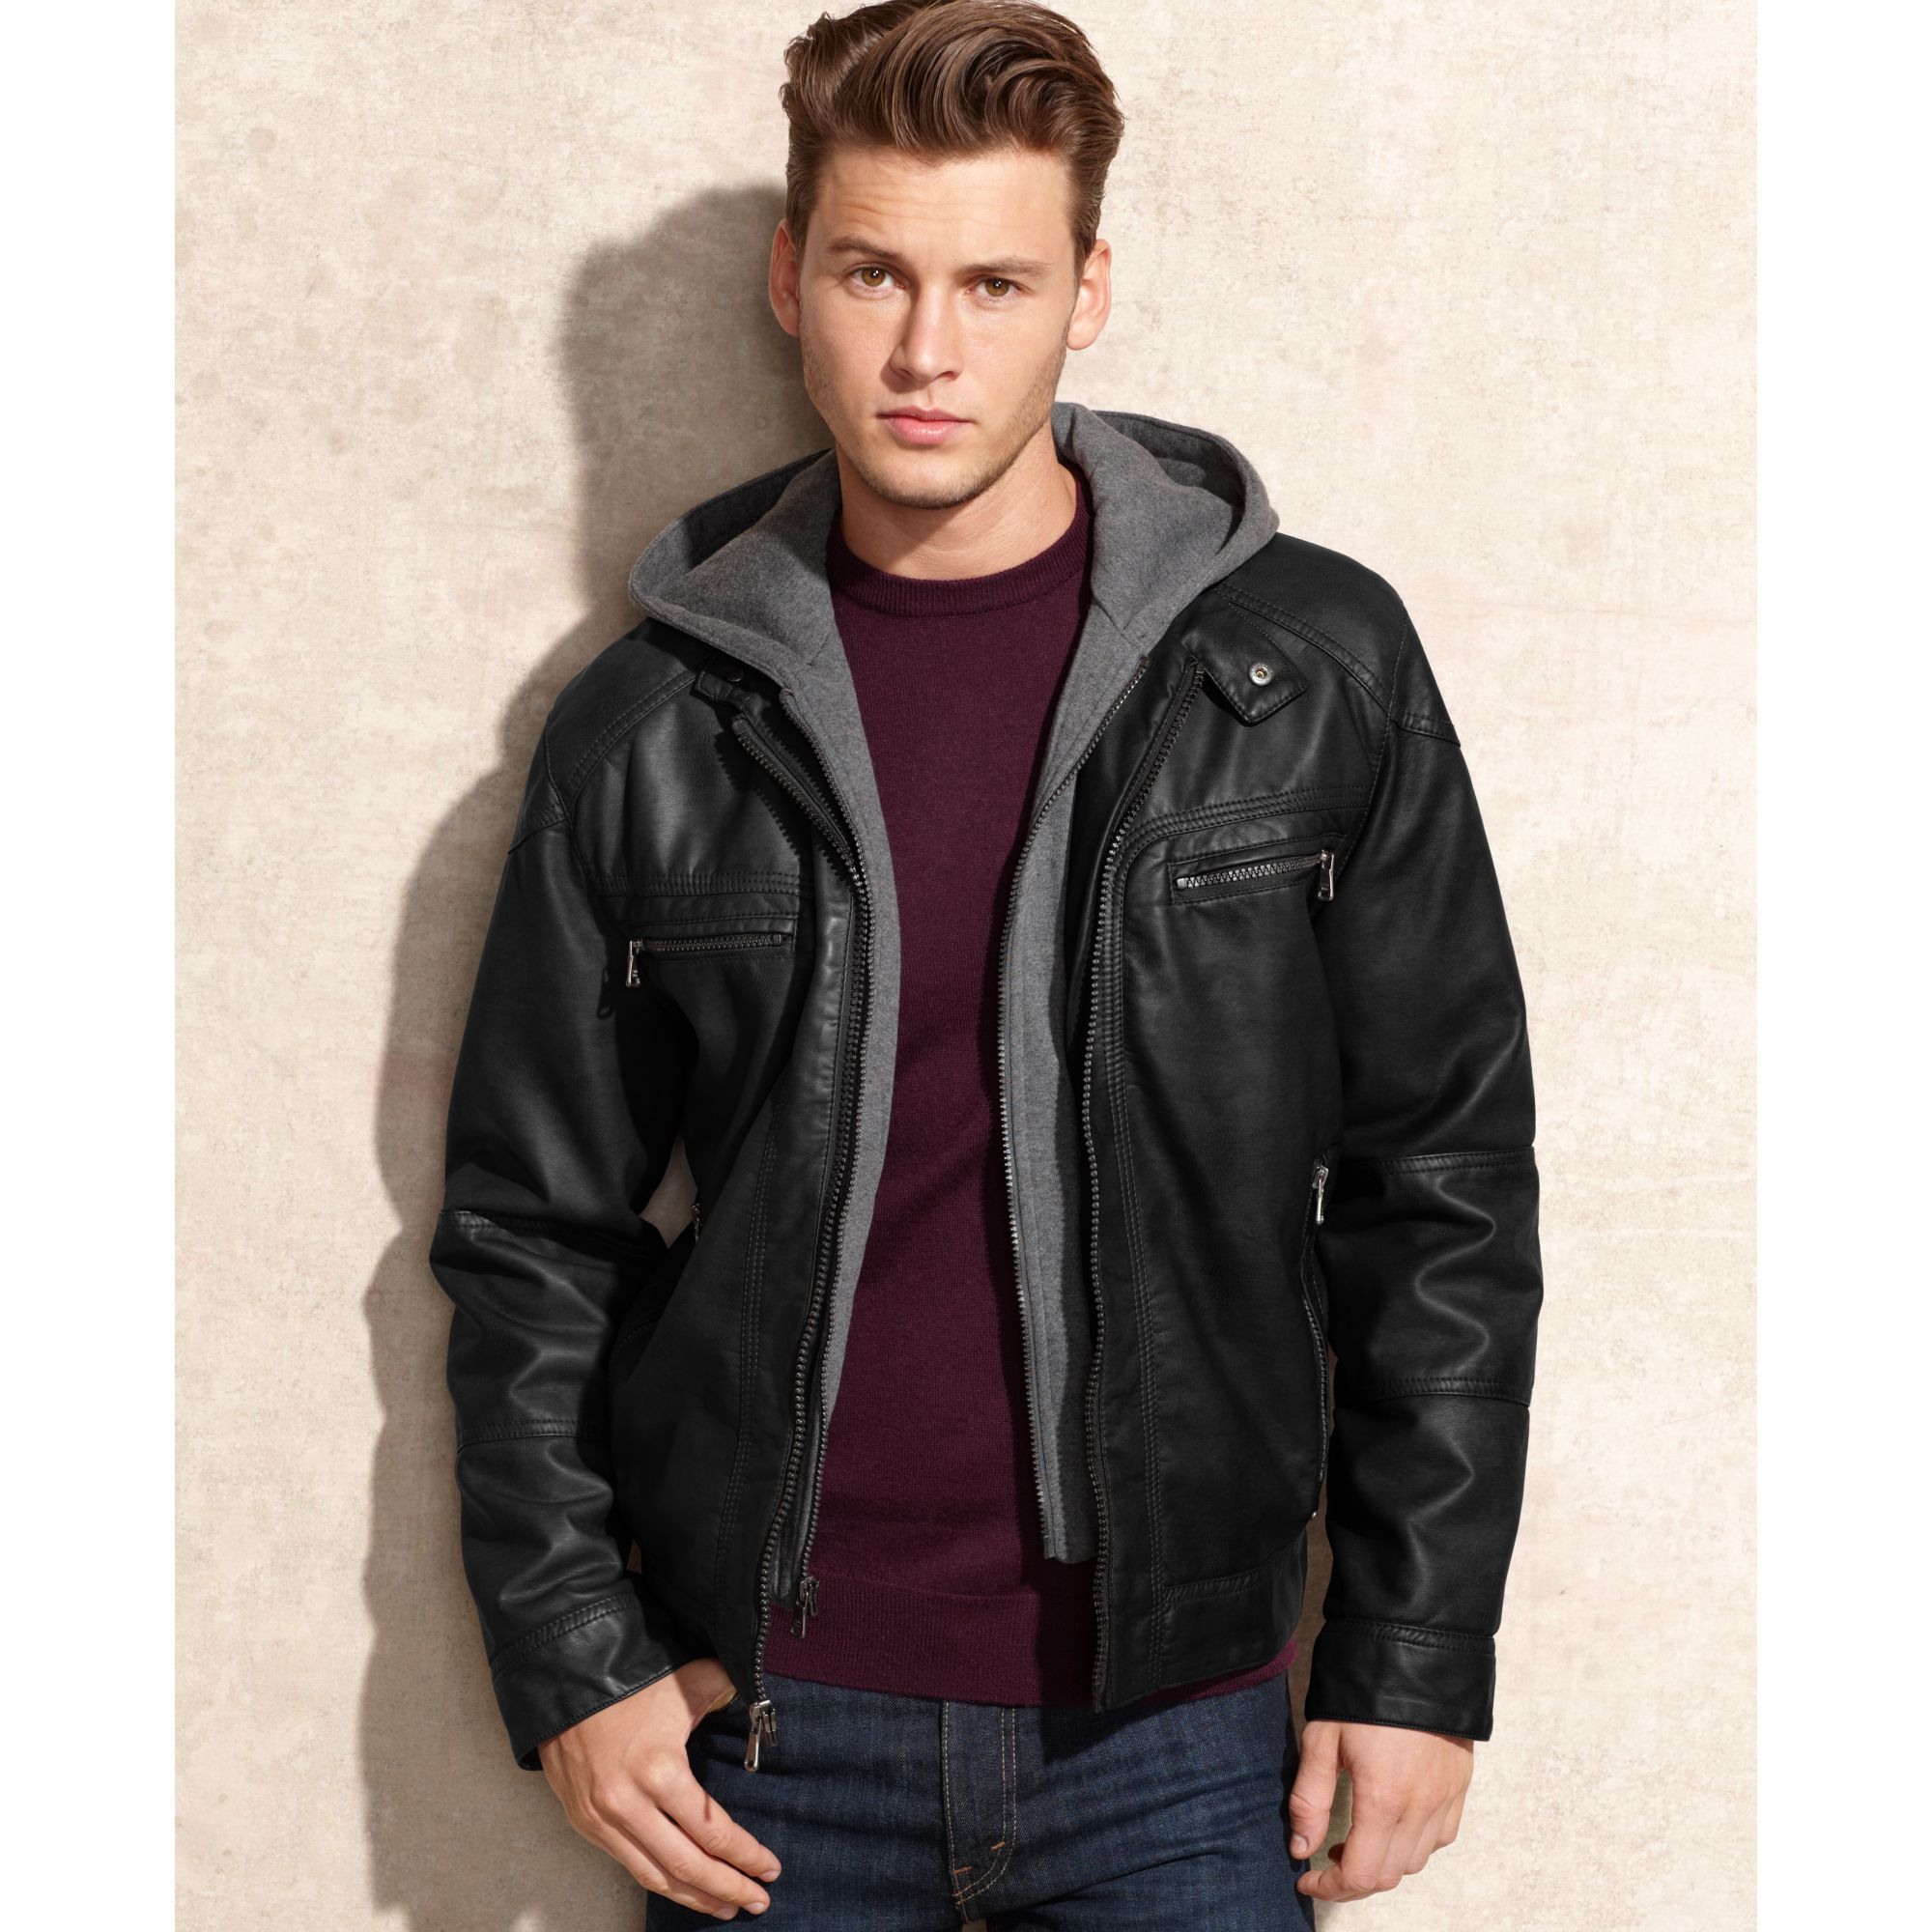 Calvin Klein Hooded Faux Leather Jacket 